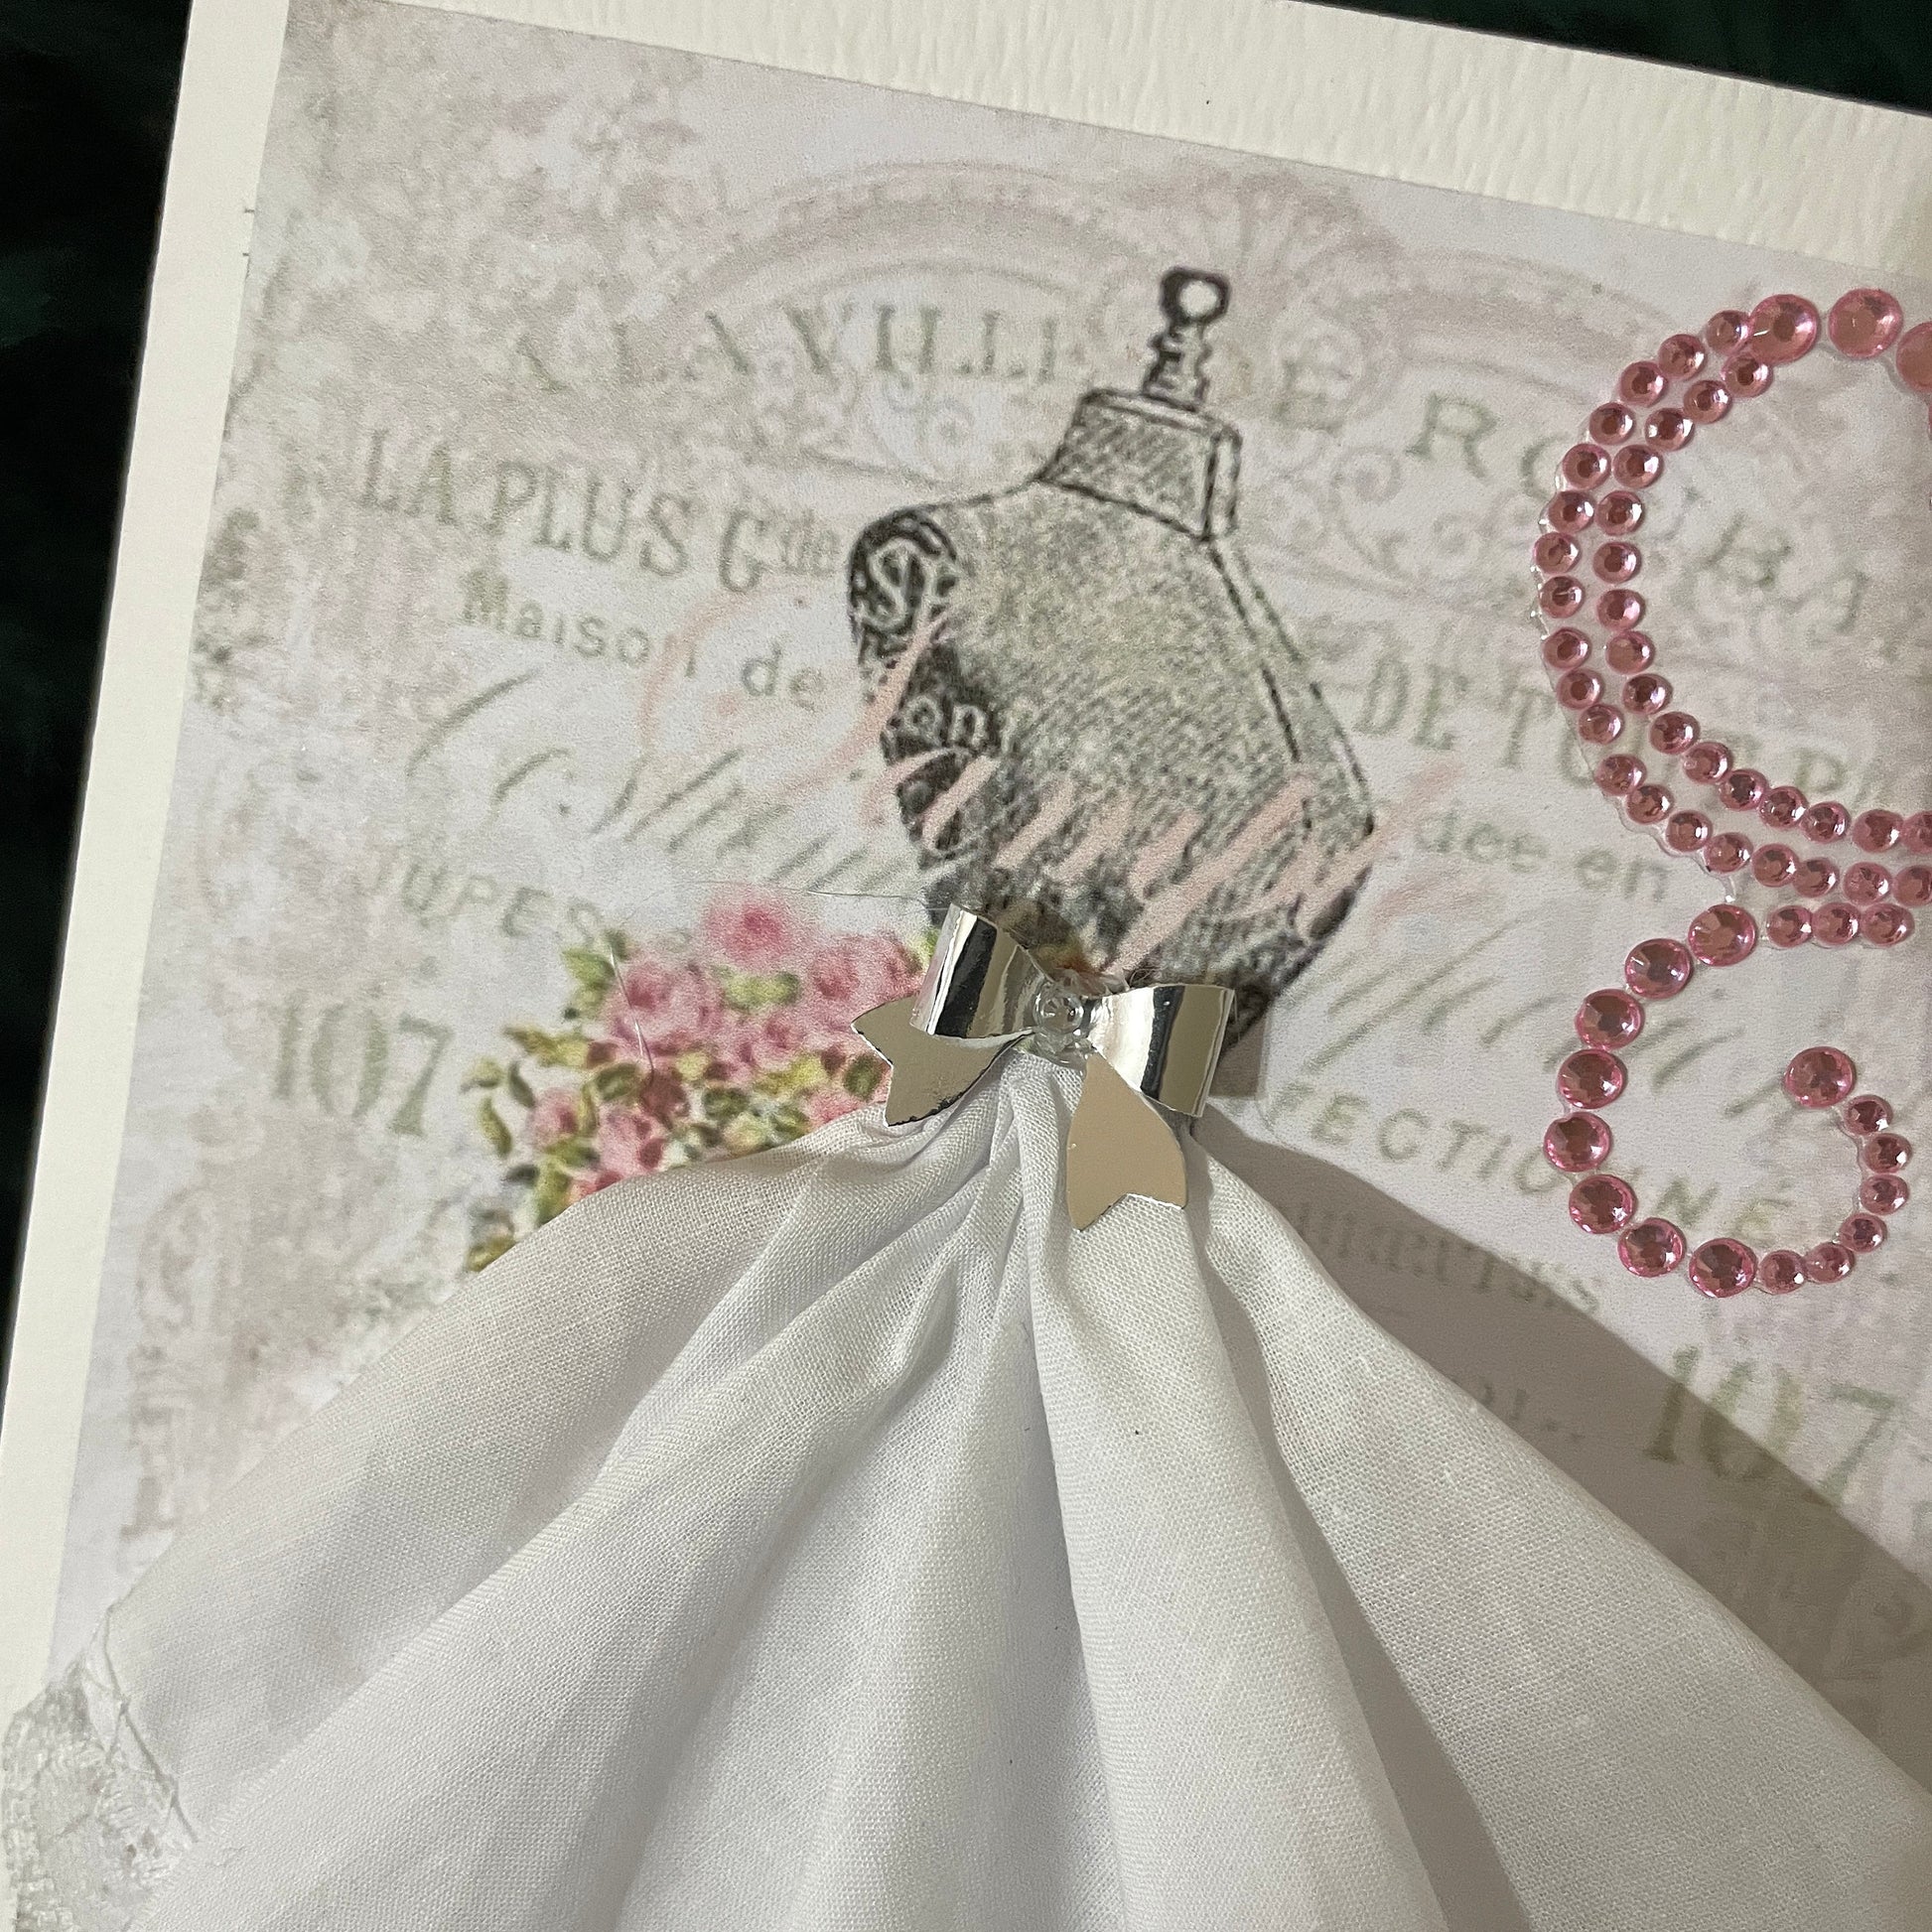 Beautiful handmade greeting card for a special lady. The dress is a ladies handkerchief to use by simply pulling on her dress to use it. Perfect all in one gift and card together.